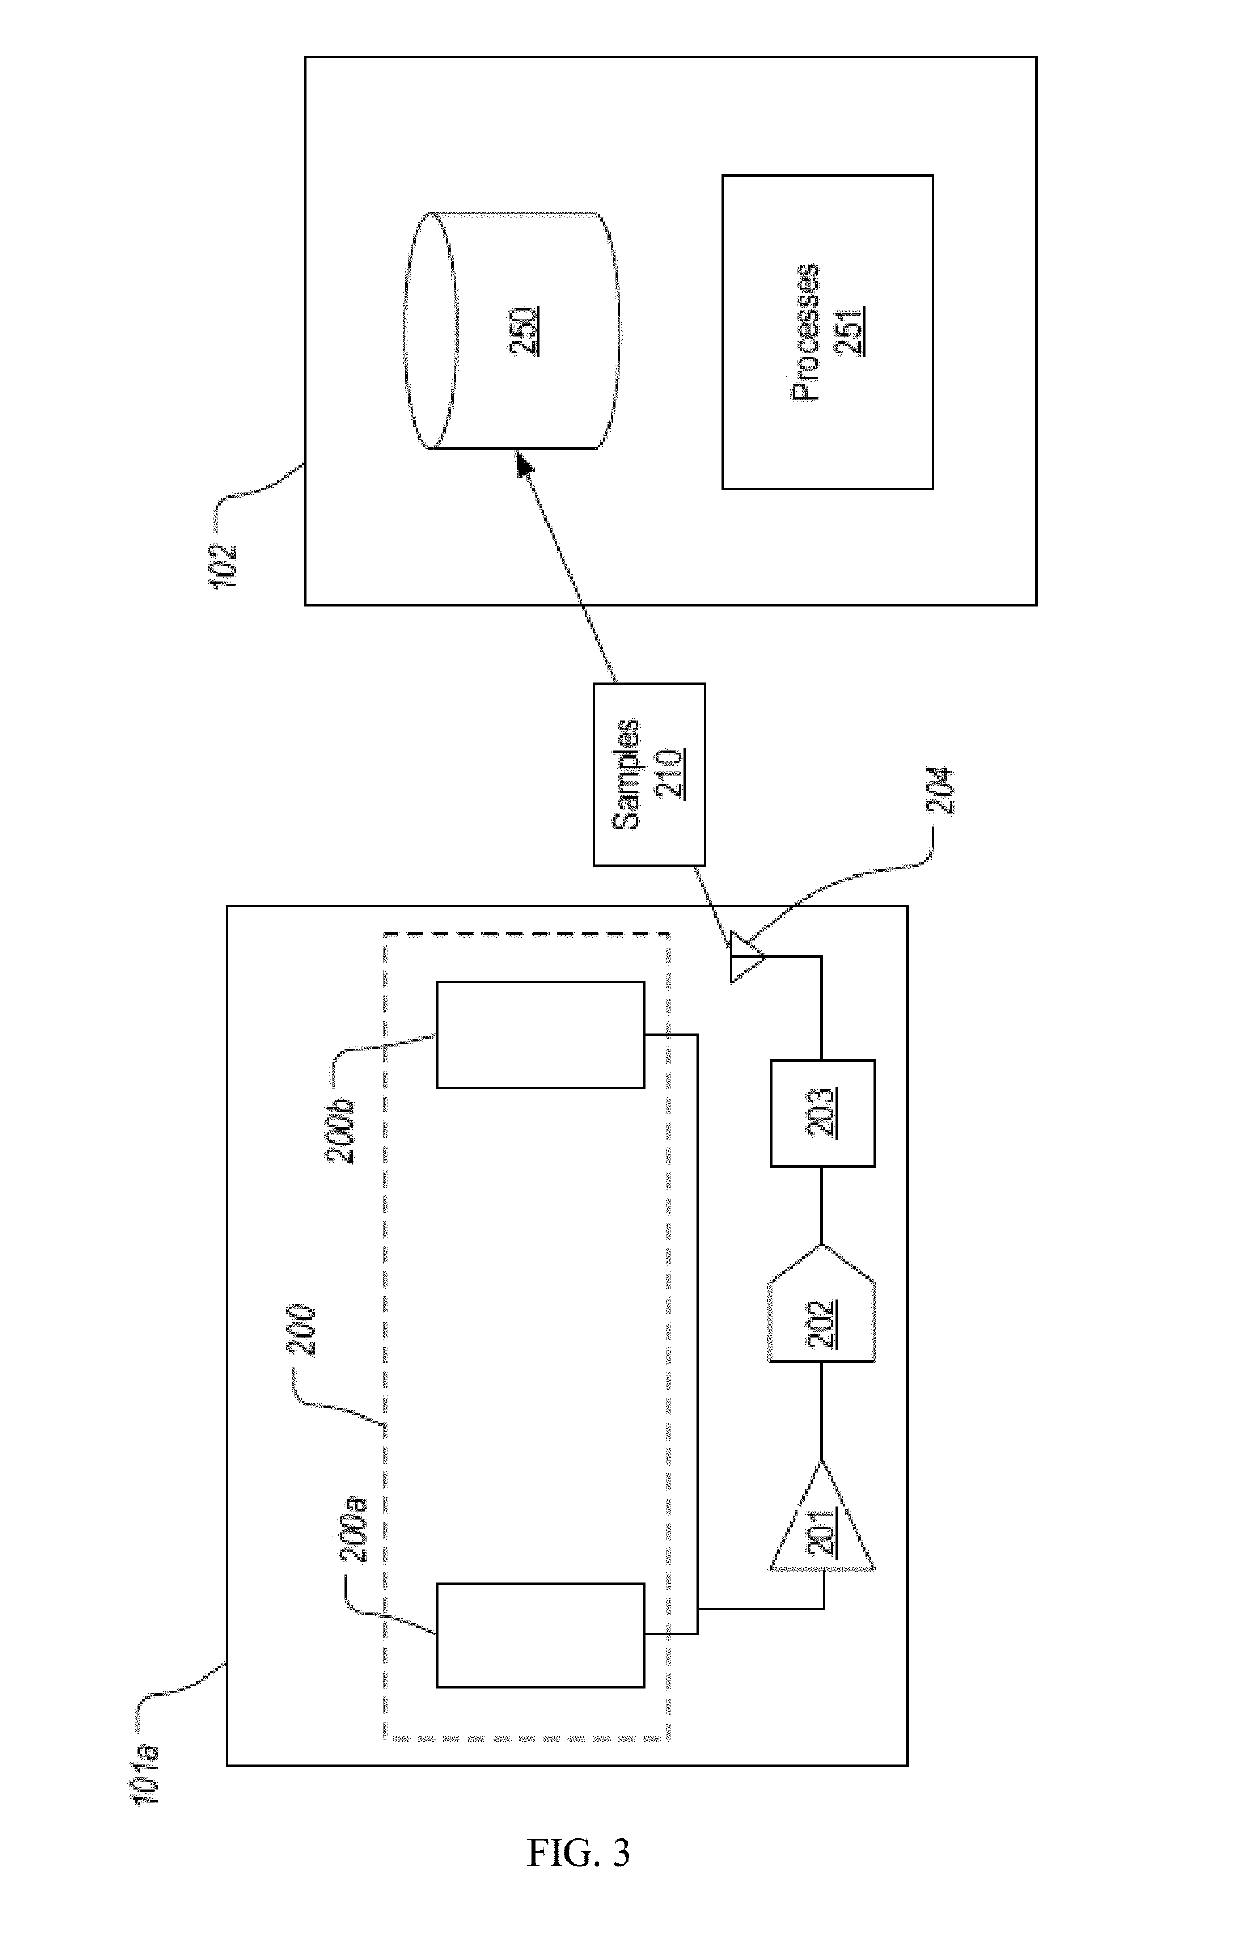 Device and system for monitoring and treating muscle tension-related medical conditions